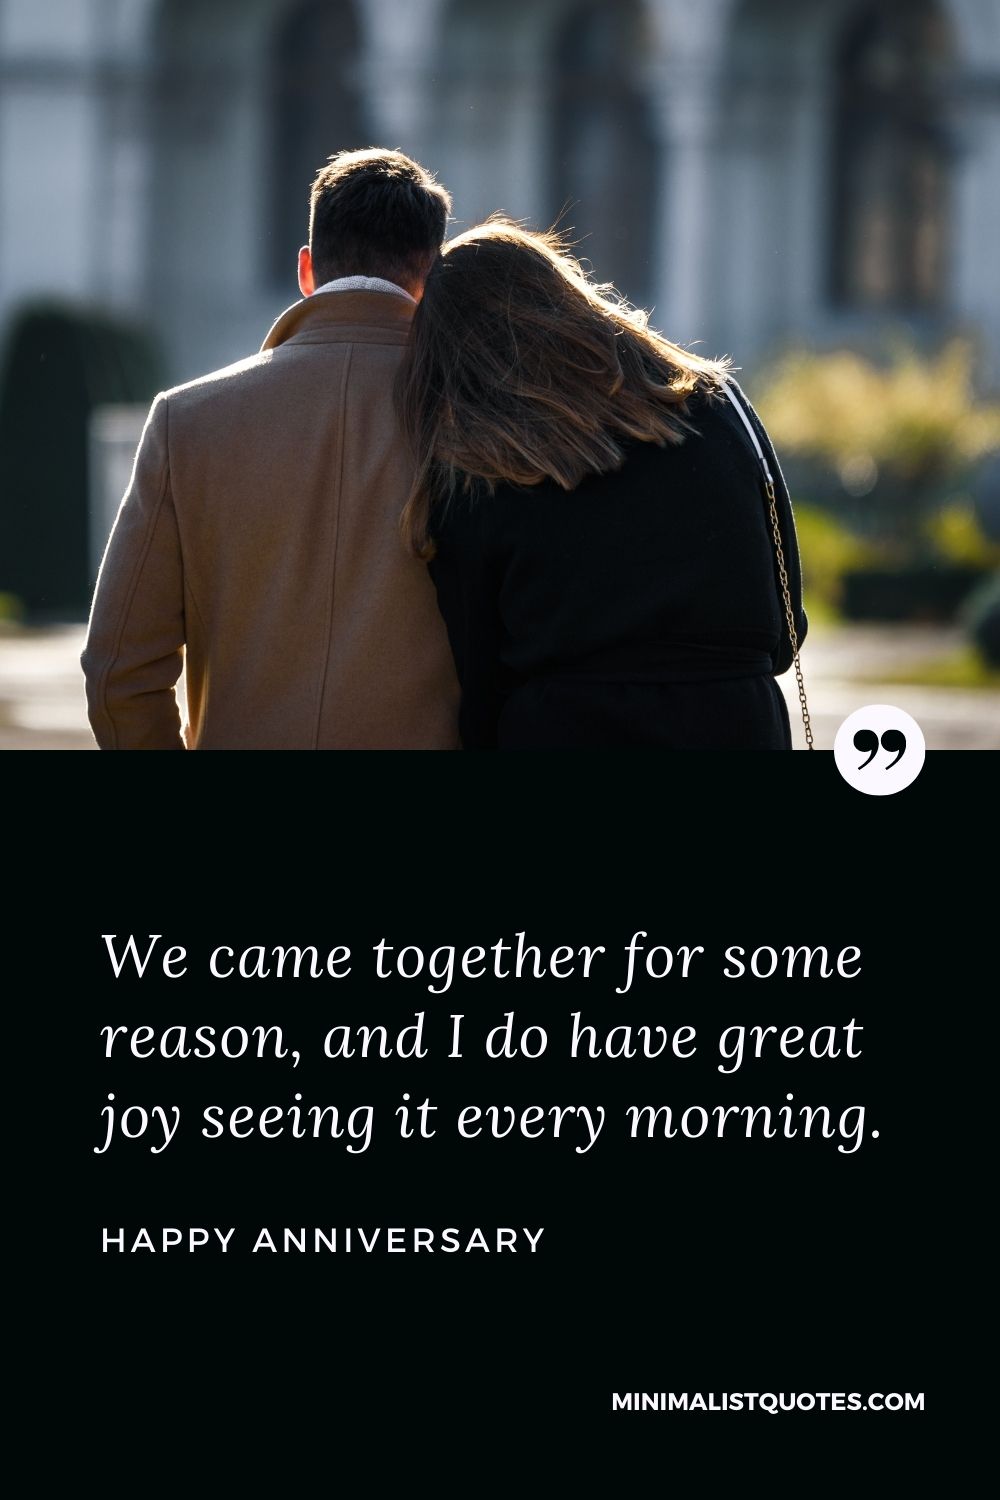 Anniversary Wish & Message With HD Image: We came together for some reason, and I do have great joy seeing it every morning. Happy Anniversary!